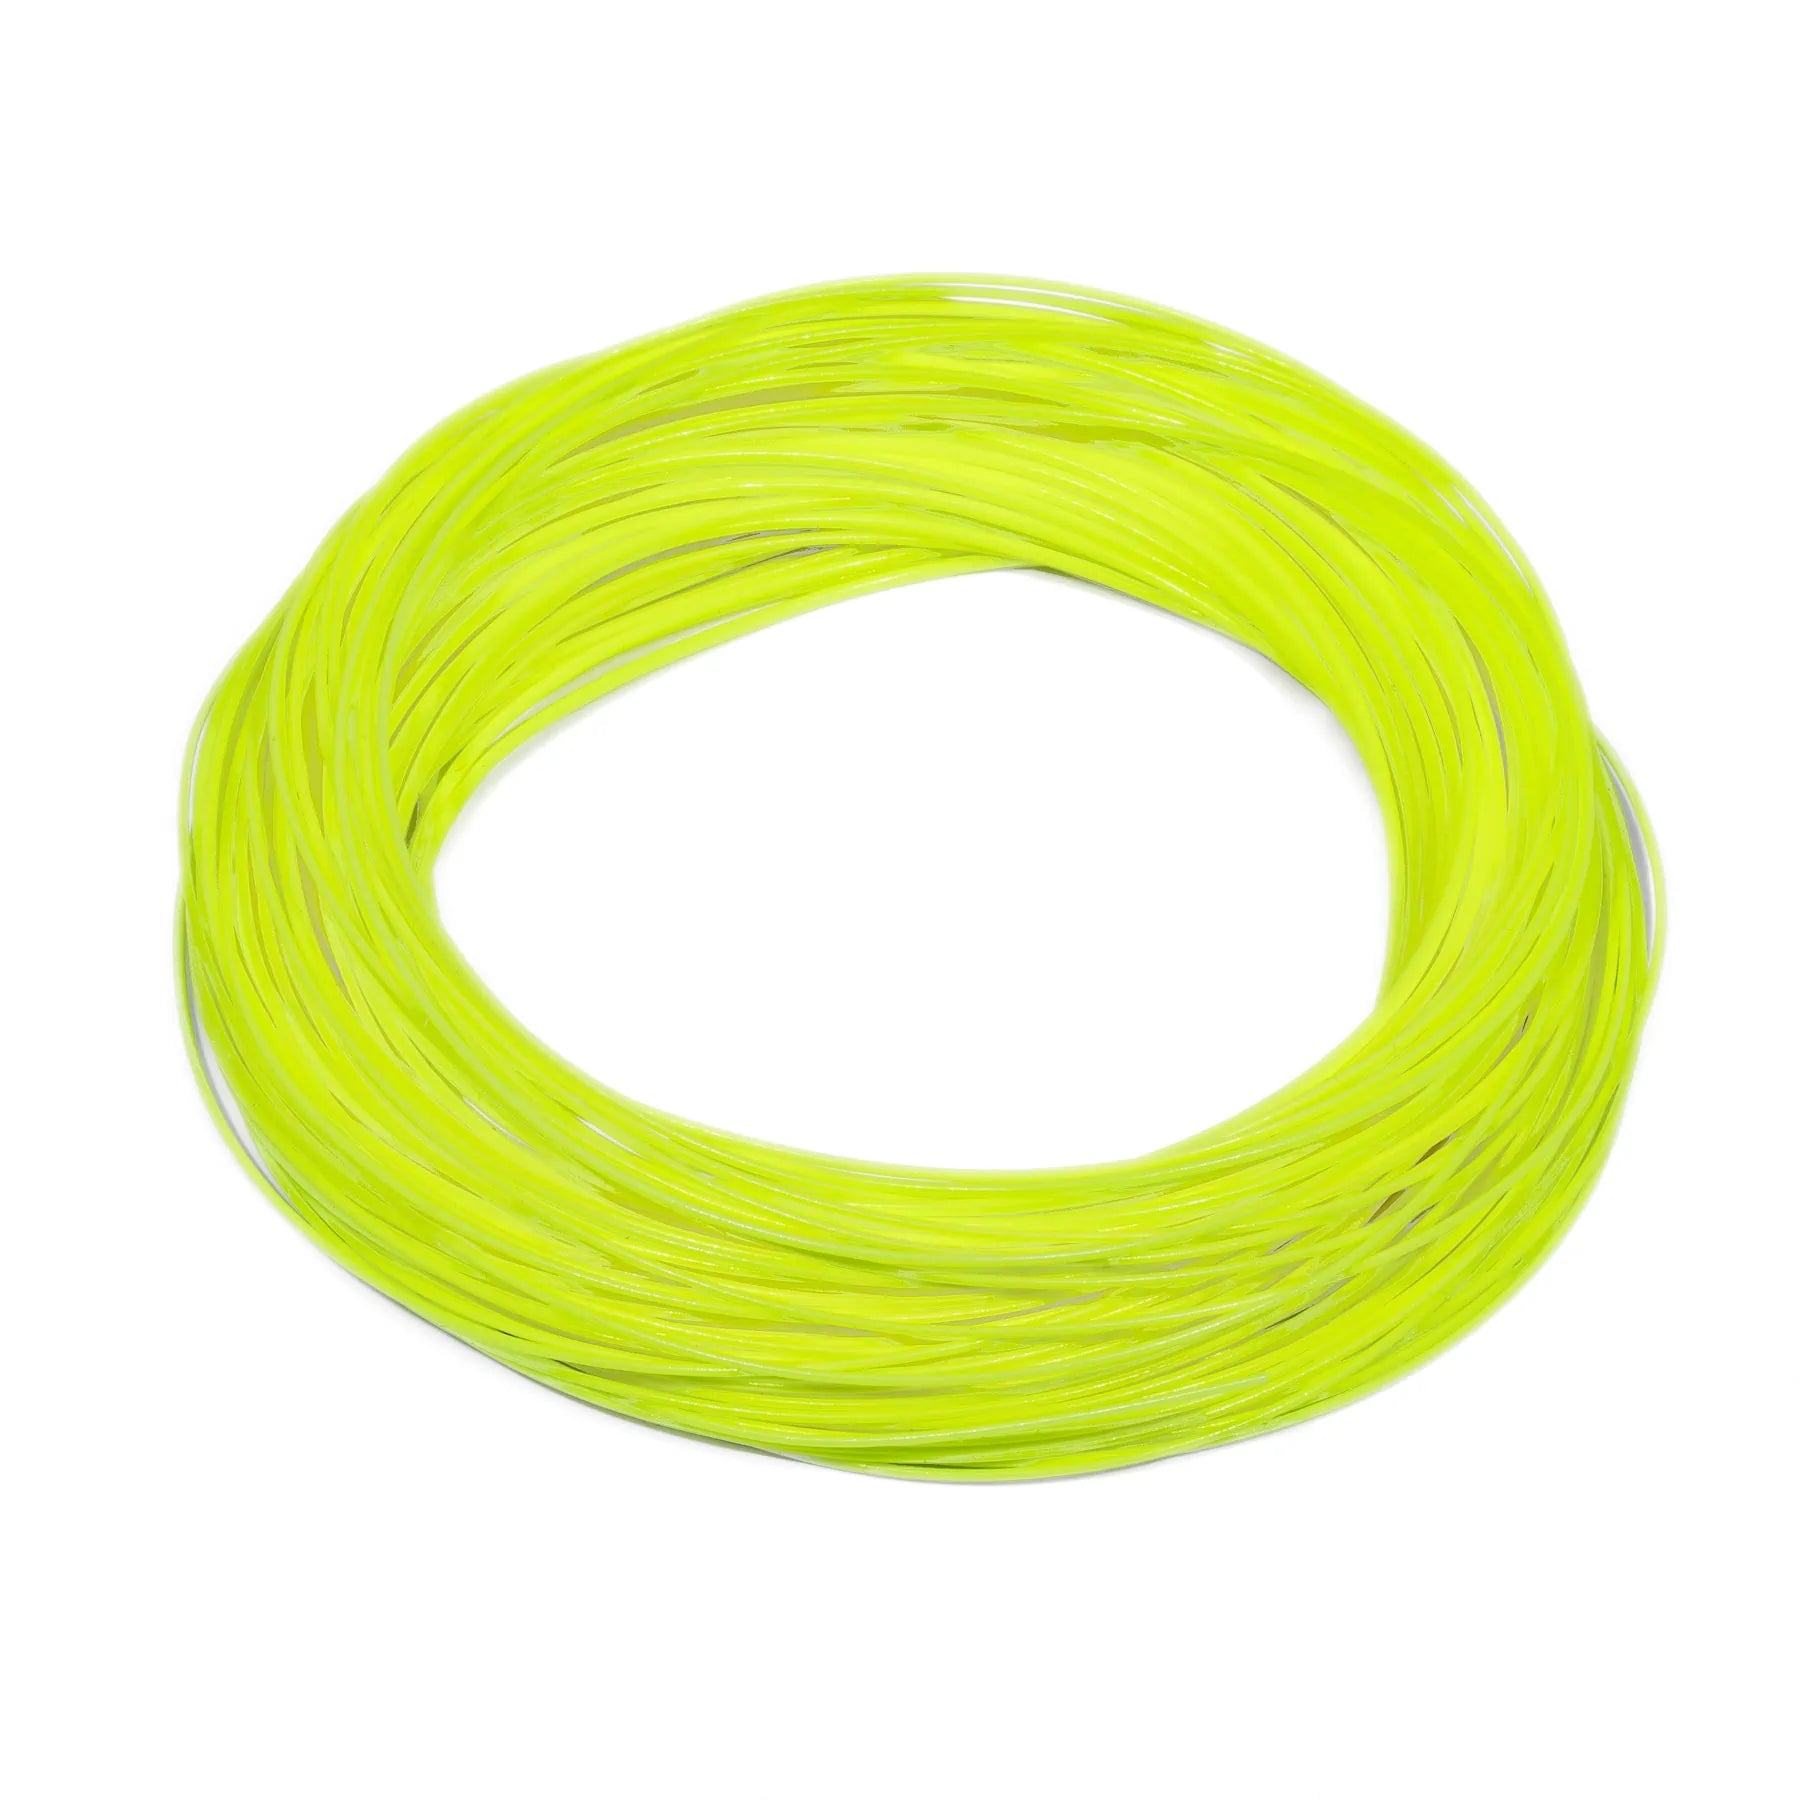 Silvertip Weight Forward Fly Line - 10wt / Chartreuse / 90